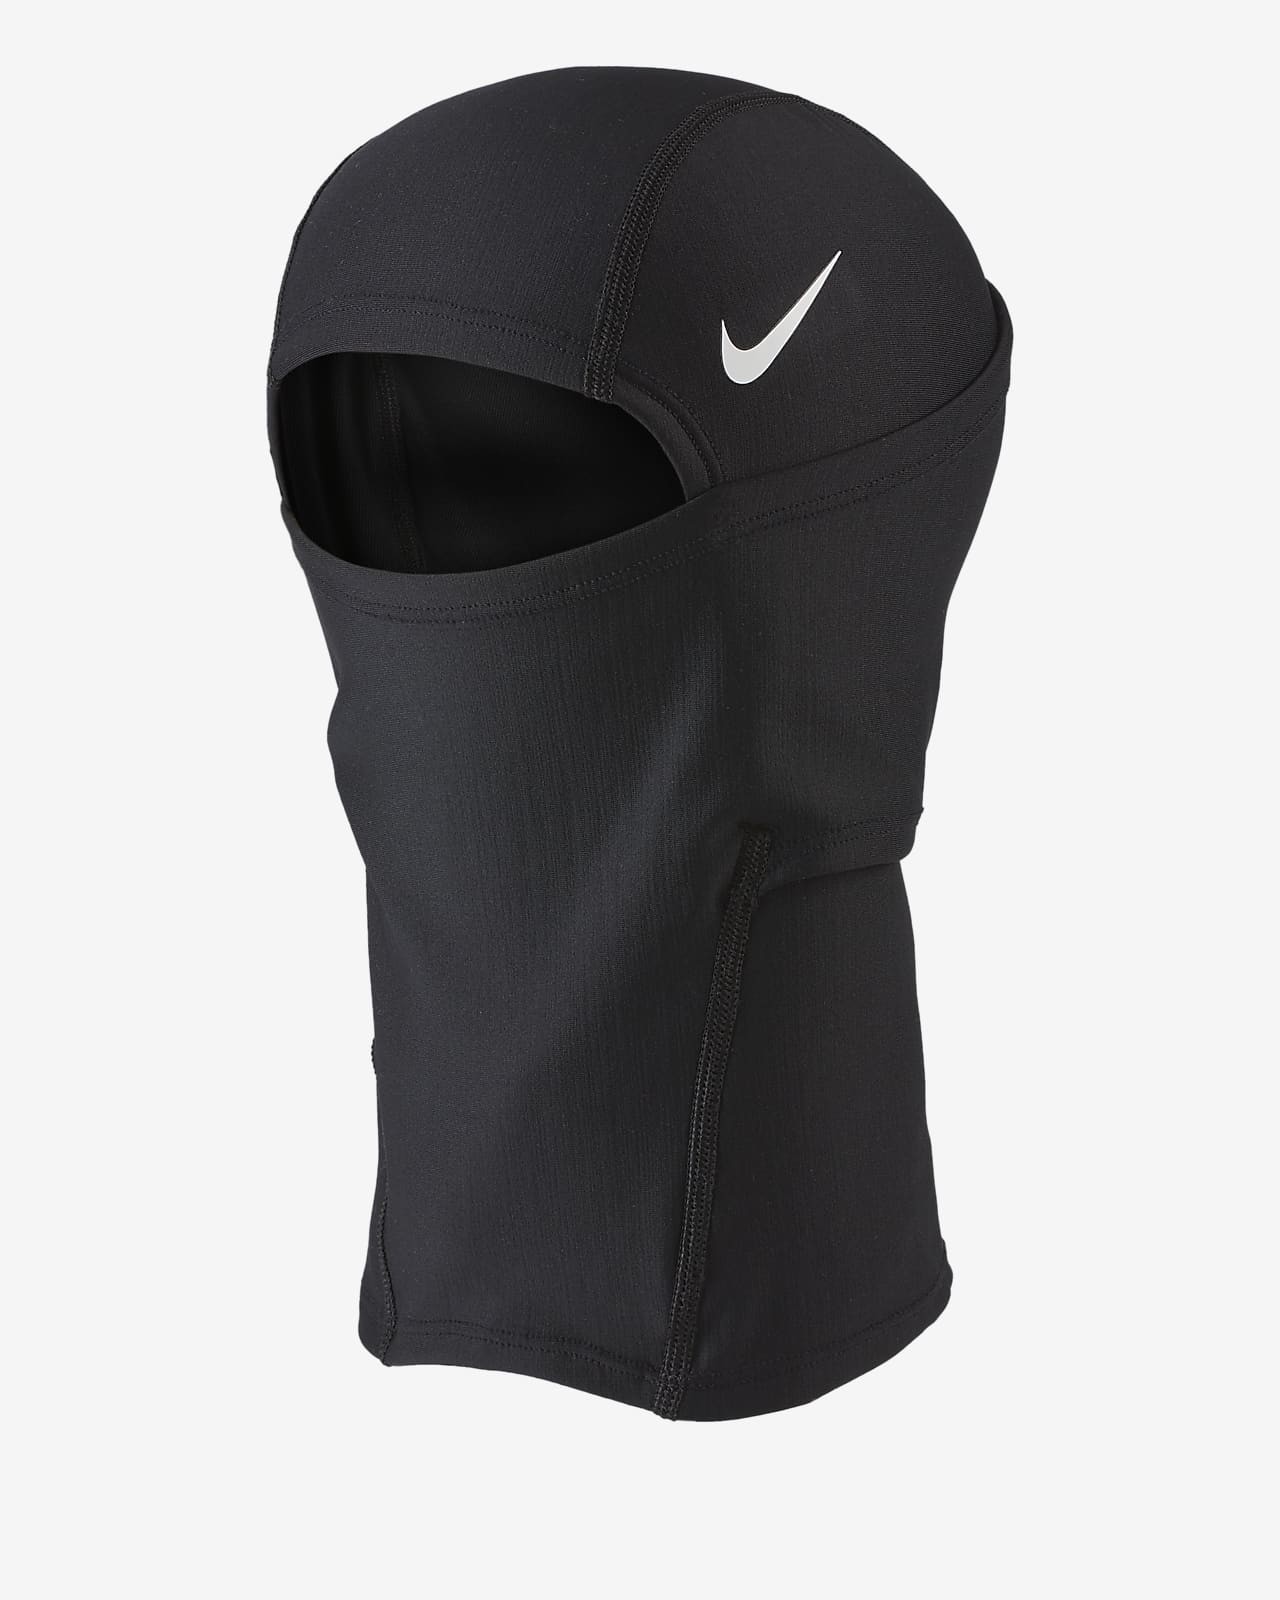 Stay Protected in Style: Top Nike Skimasks for Athletes